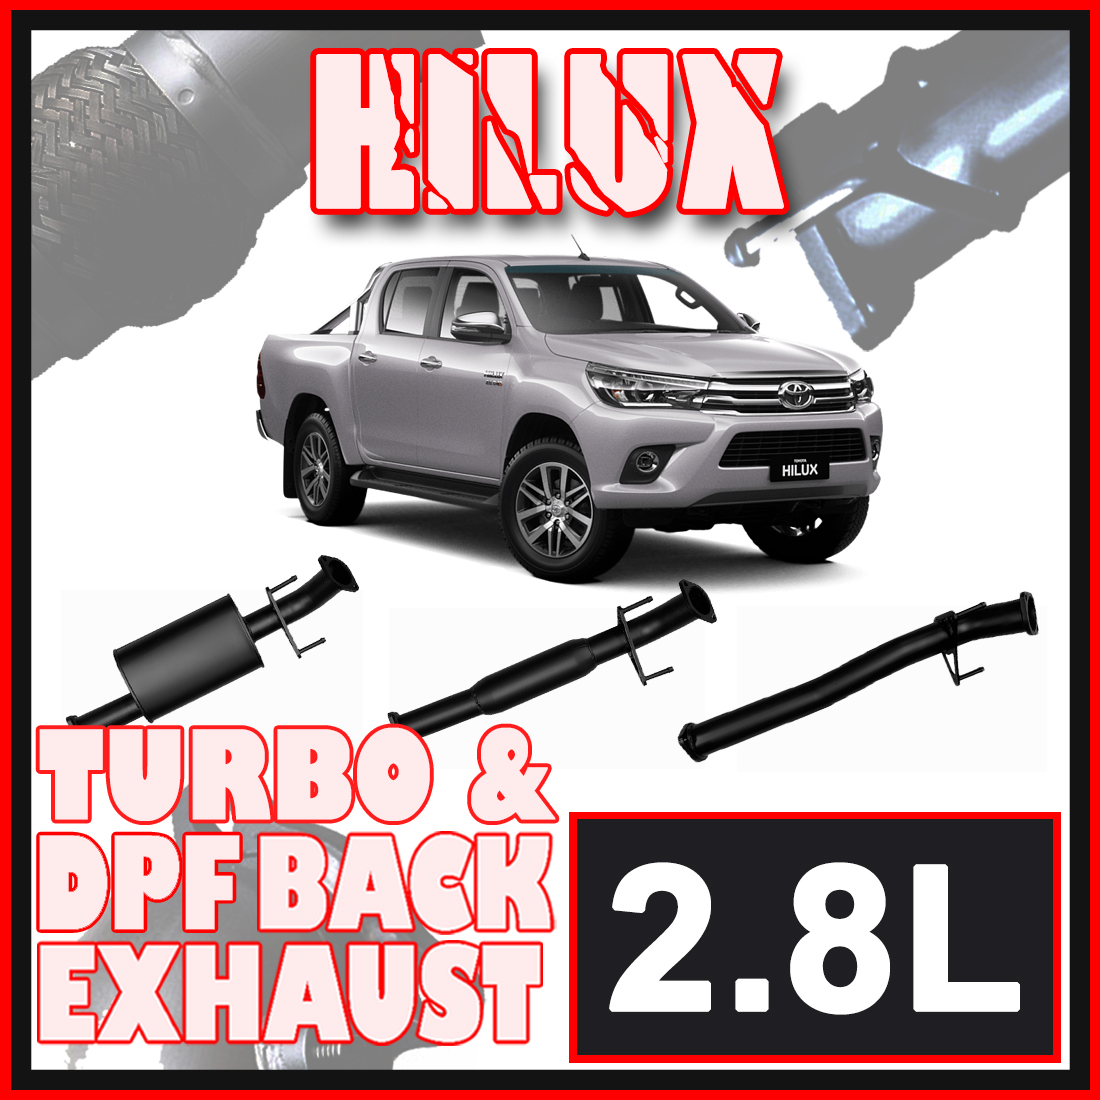 Toyota Hilux Exhaust 2.8L DPF Back Systems image